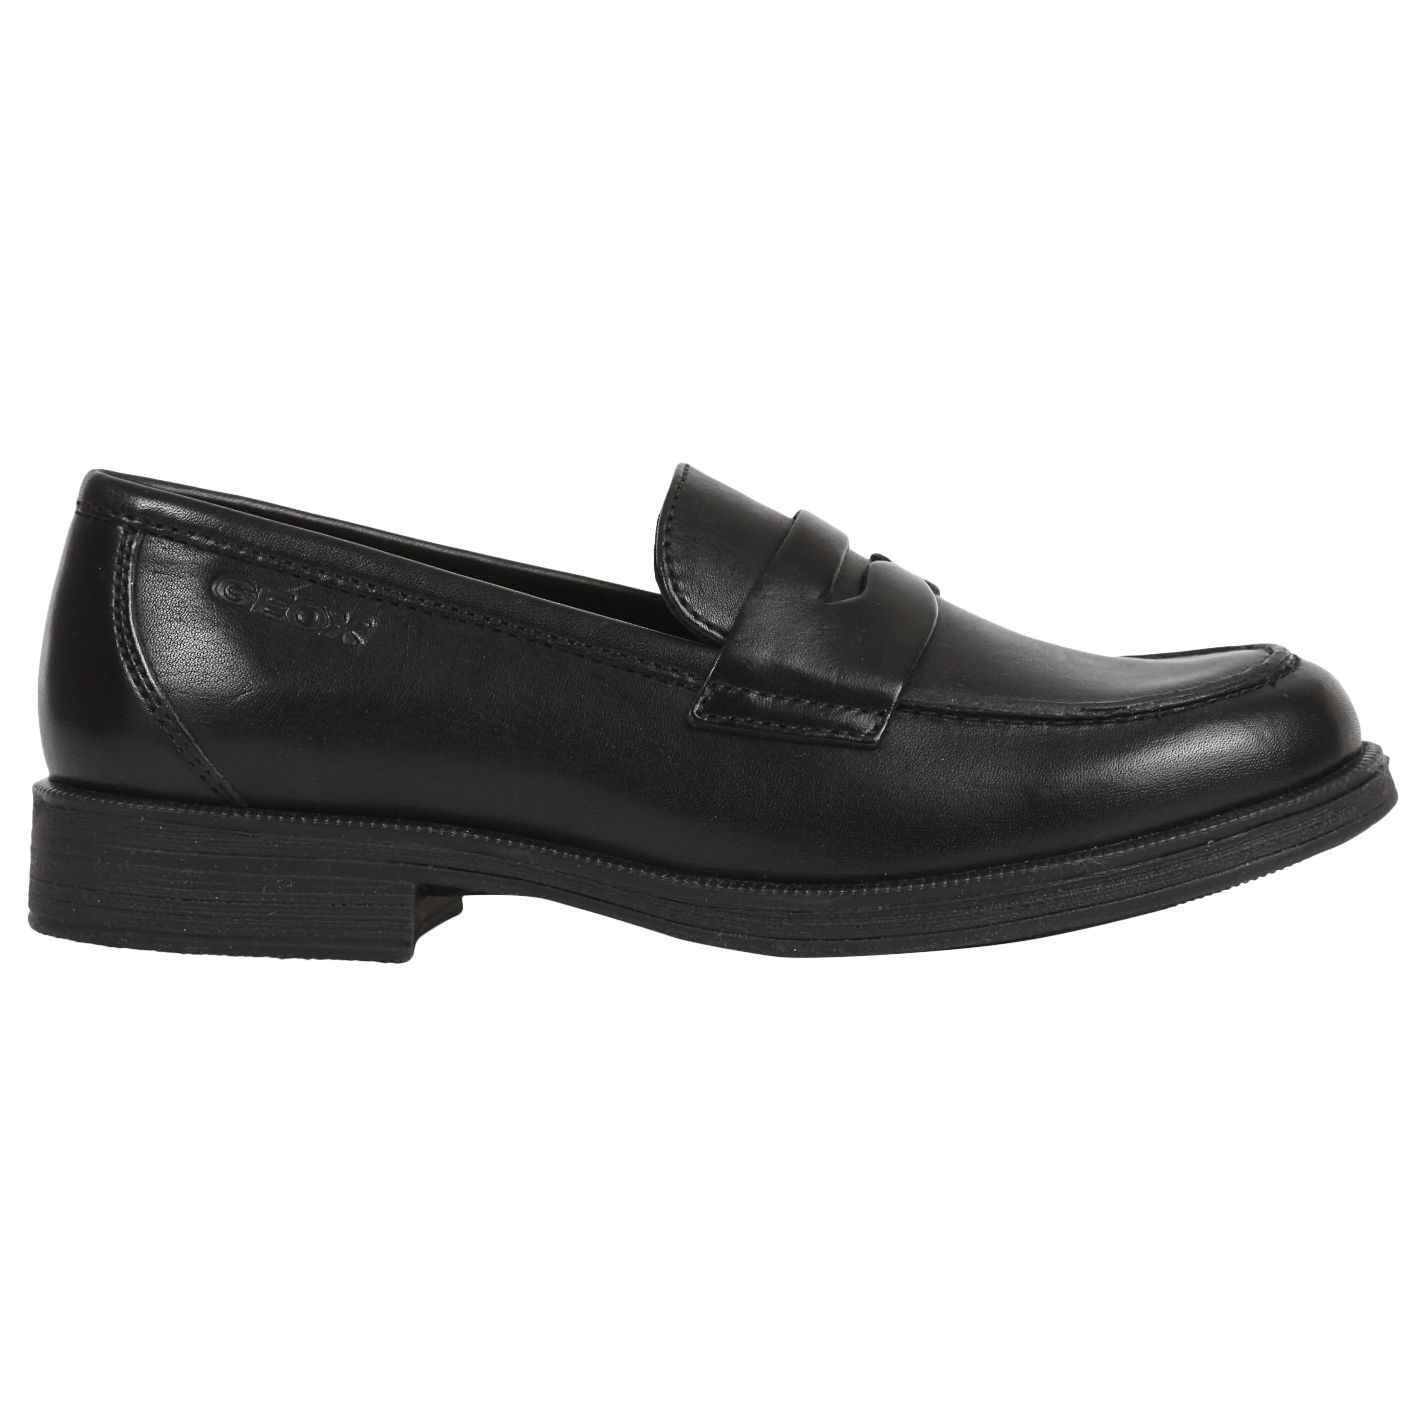 Geox Agata Leather Shoes, Black at John Lewis & Partners